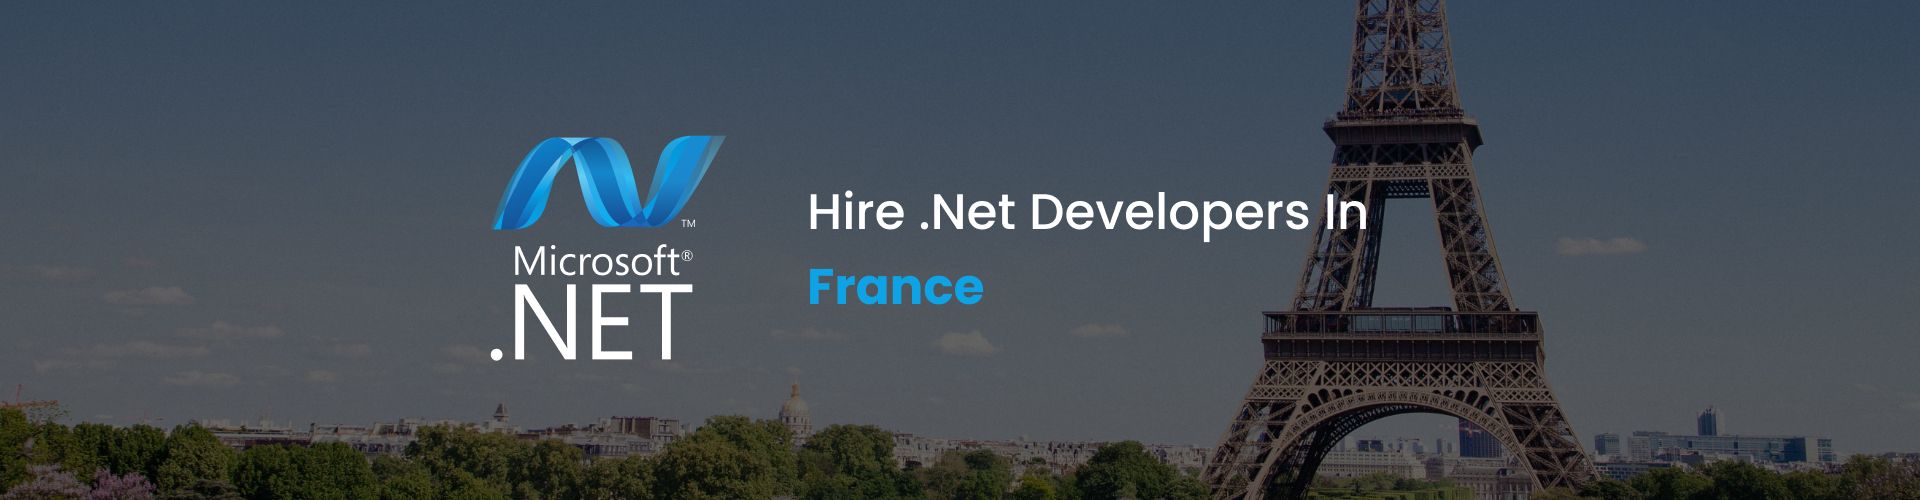 hire .net developers in france